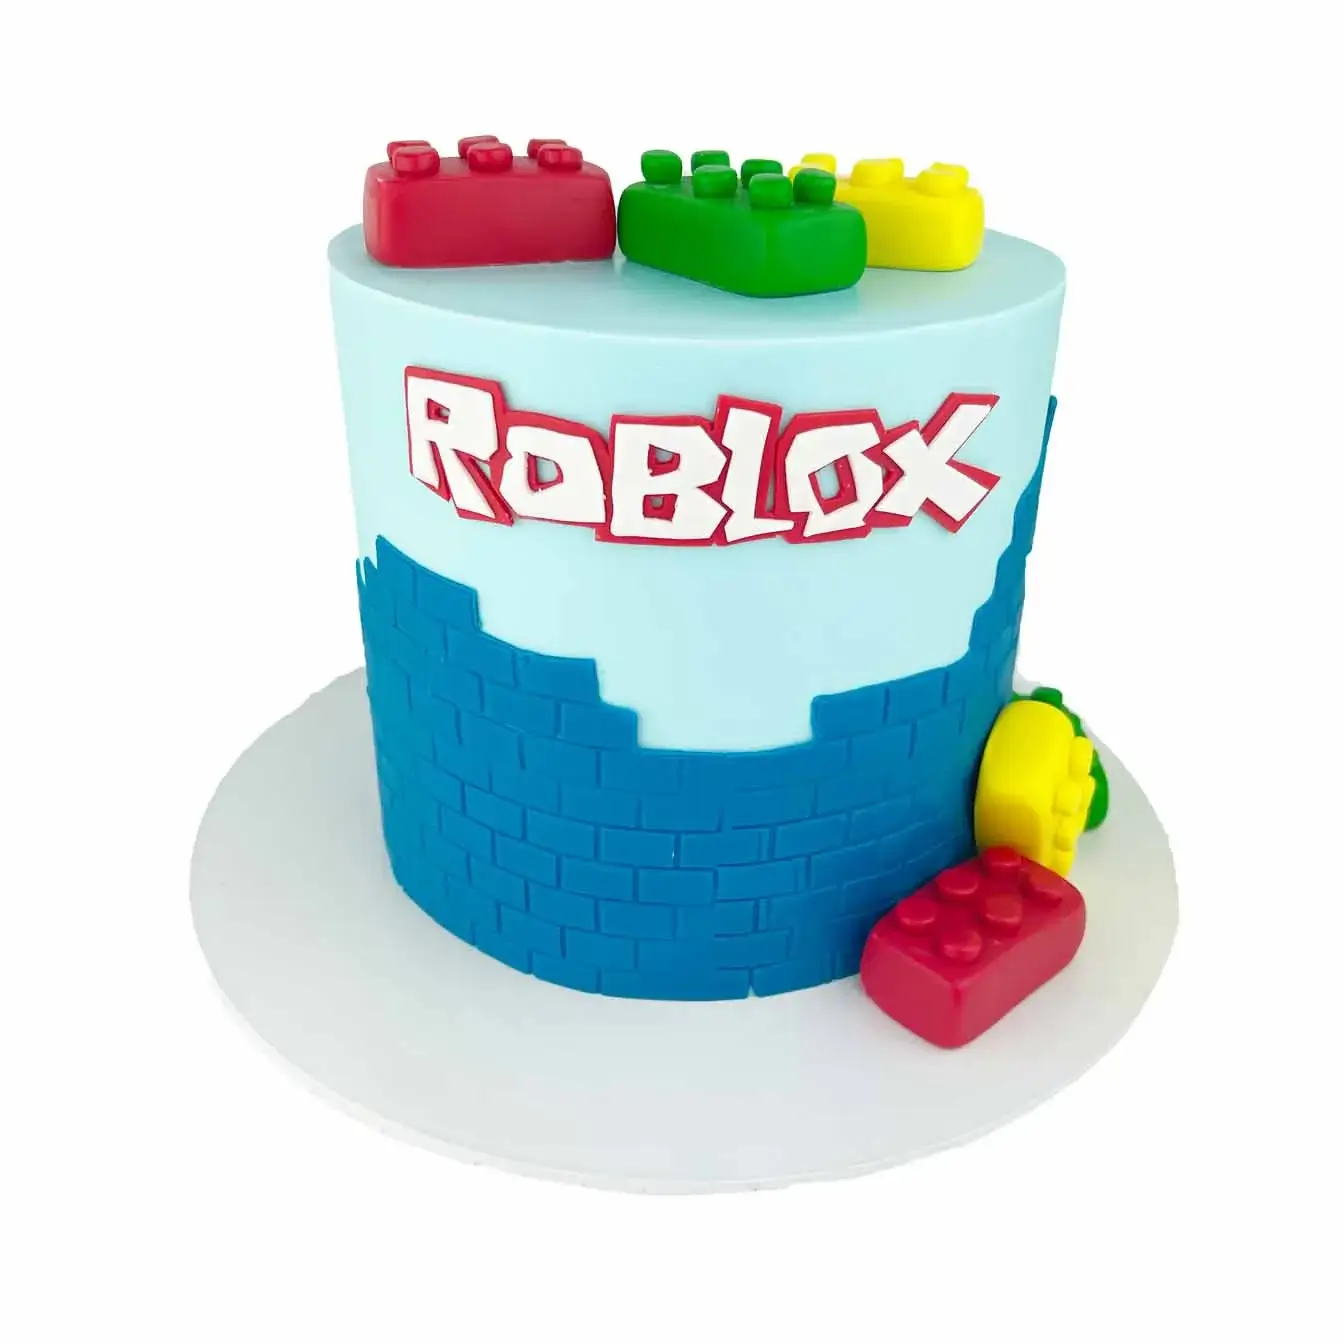 Roblox Adventure Block Cake - A blue-iced cake with multicolored bricks on top and the iconic Roblox logo on the front, a flavorful centerpiece for gamers and Roblox enthusiasts.